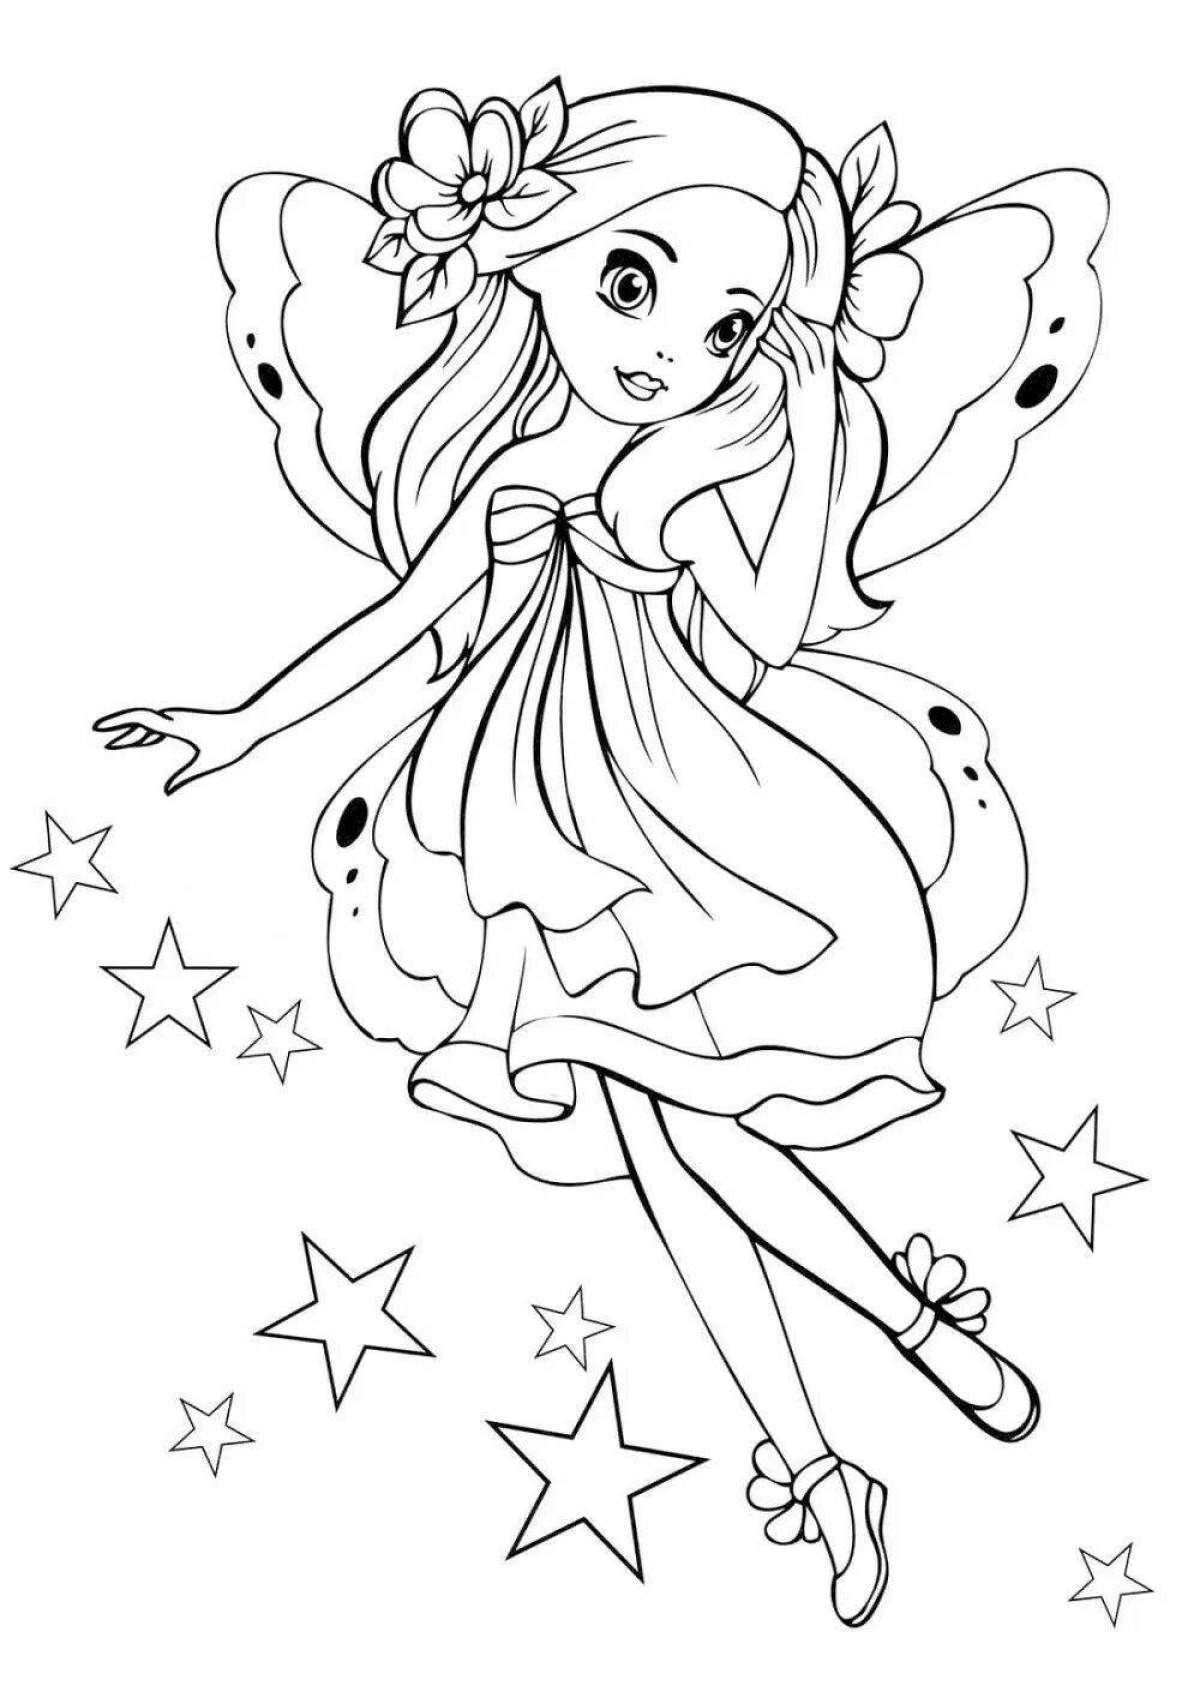 Fairy glitter coloring book for kids 5-6 years old